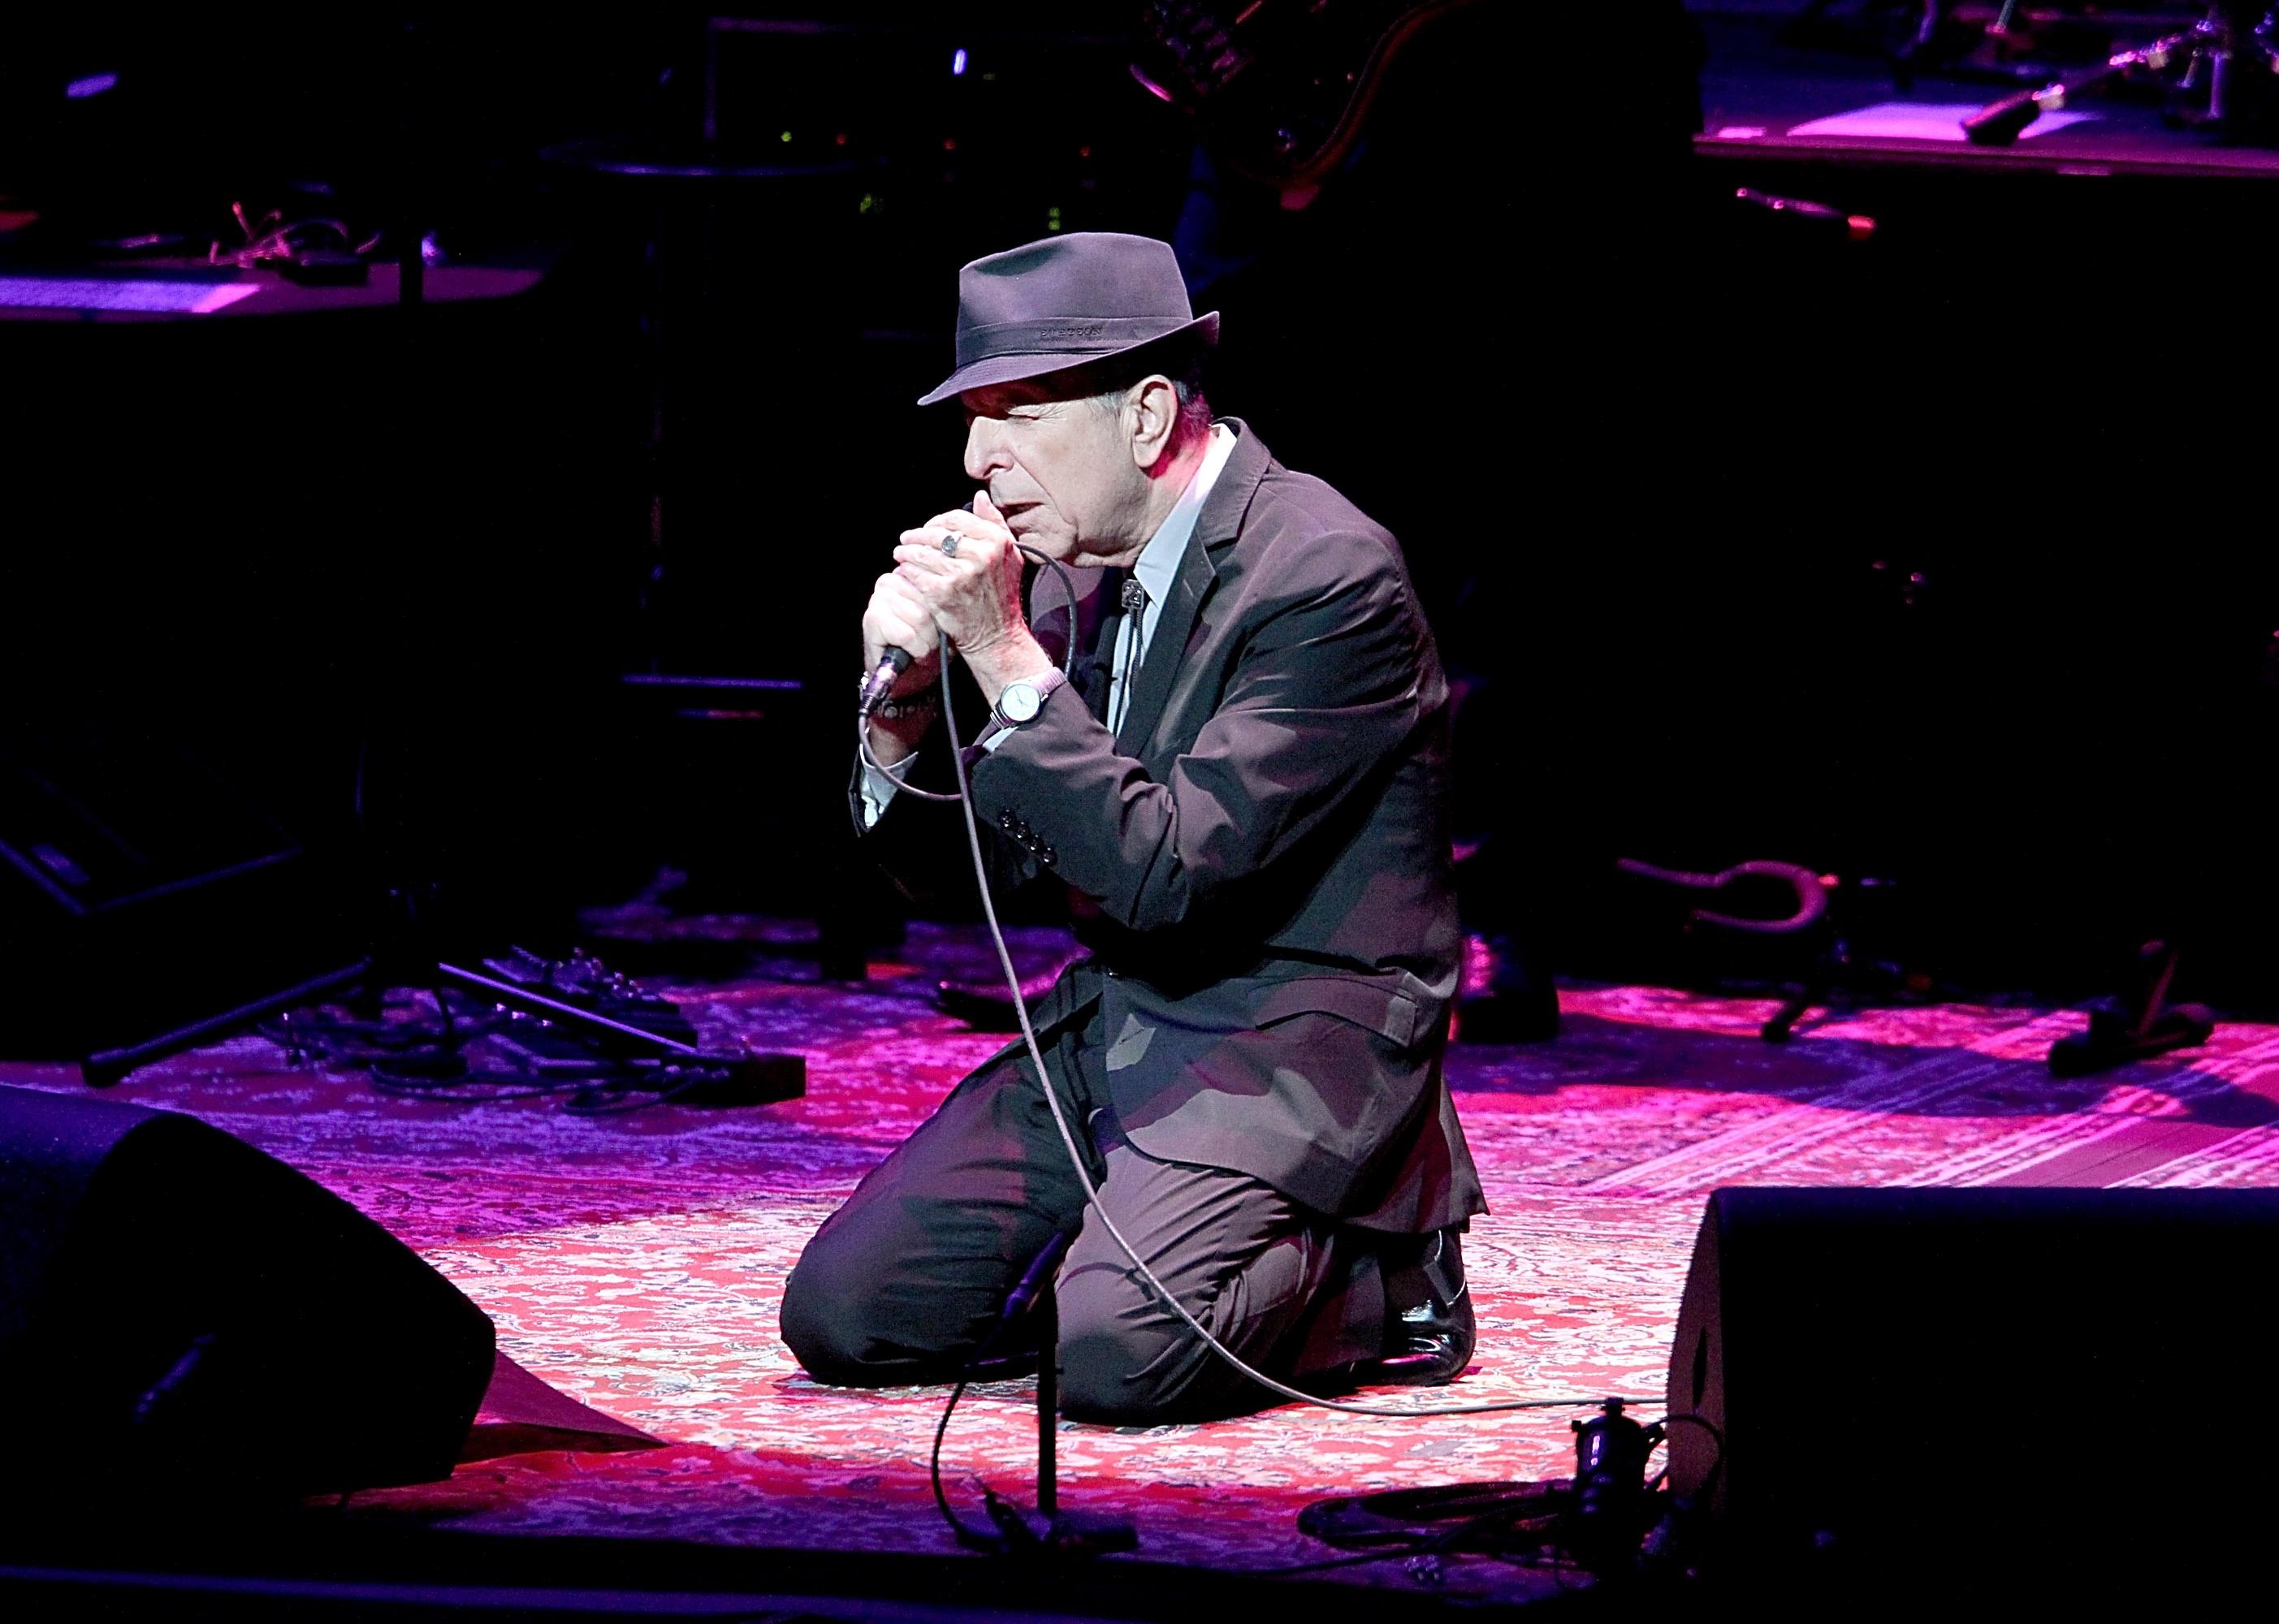 <p>Canadian singer-songwriter <a href="https://www.billboard.com/music/features/leonard-cohen-embezzlement-career-comeback-7580545/">Leonard Cohen reluctantly hit the road</a> in the late stage of his career, only to discover a newfound love for live performance. His Old Ideas World Tour ran for over a year and touched down across his entire catalog. A spectacular celebration of the art of song, it was his <a href="https://ew.com/article/2016/11/10/leonard-cohen-final-concert/">final concert tour before his death in 2016</a>.</p>